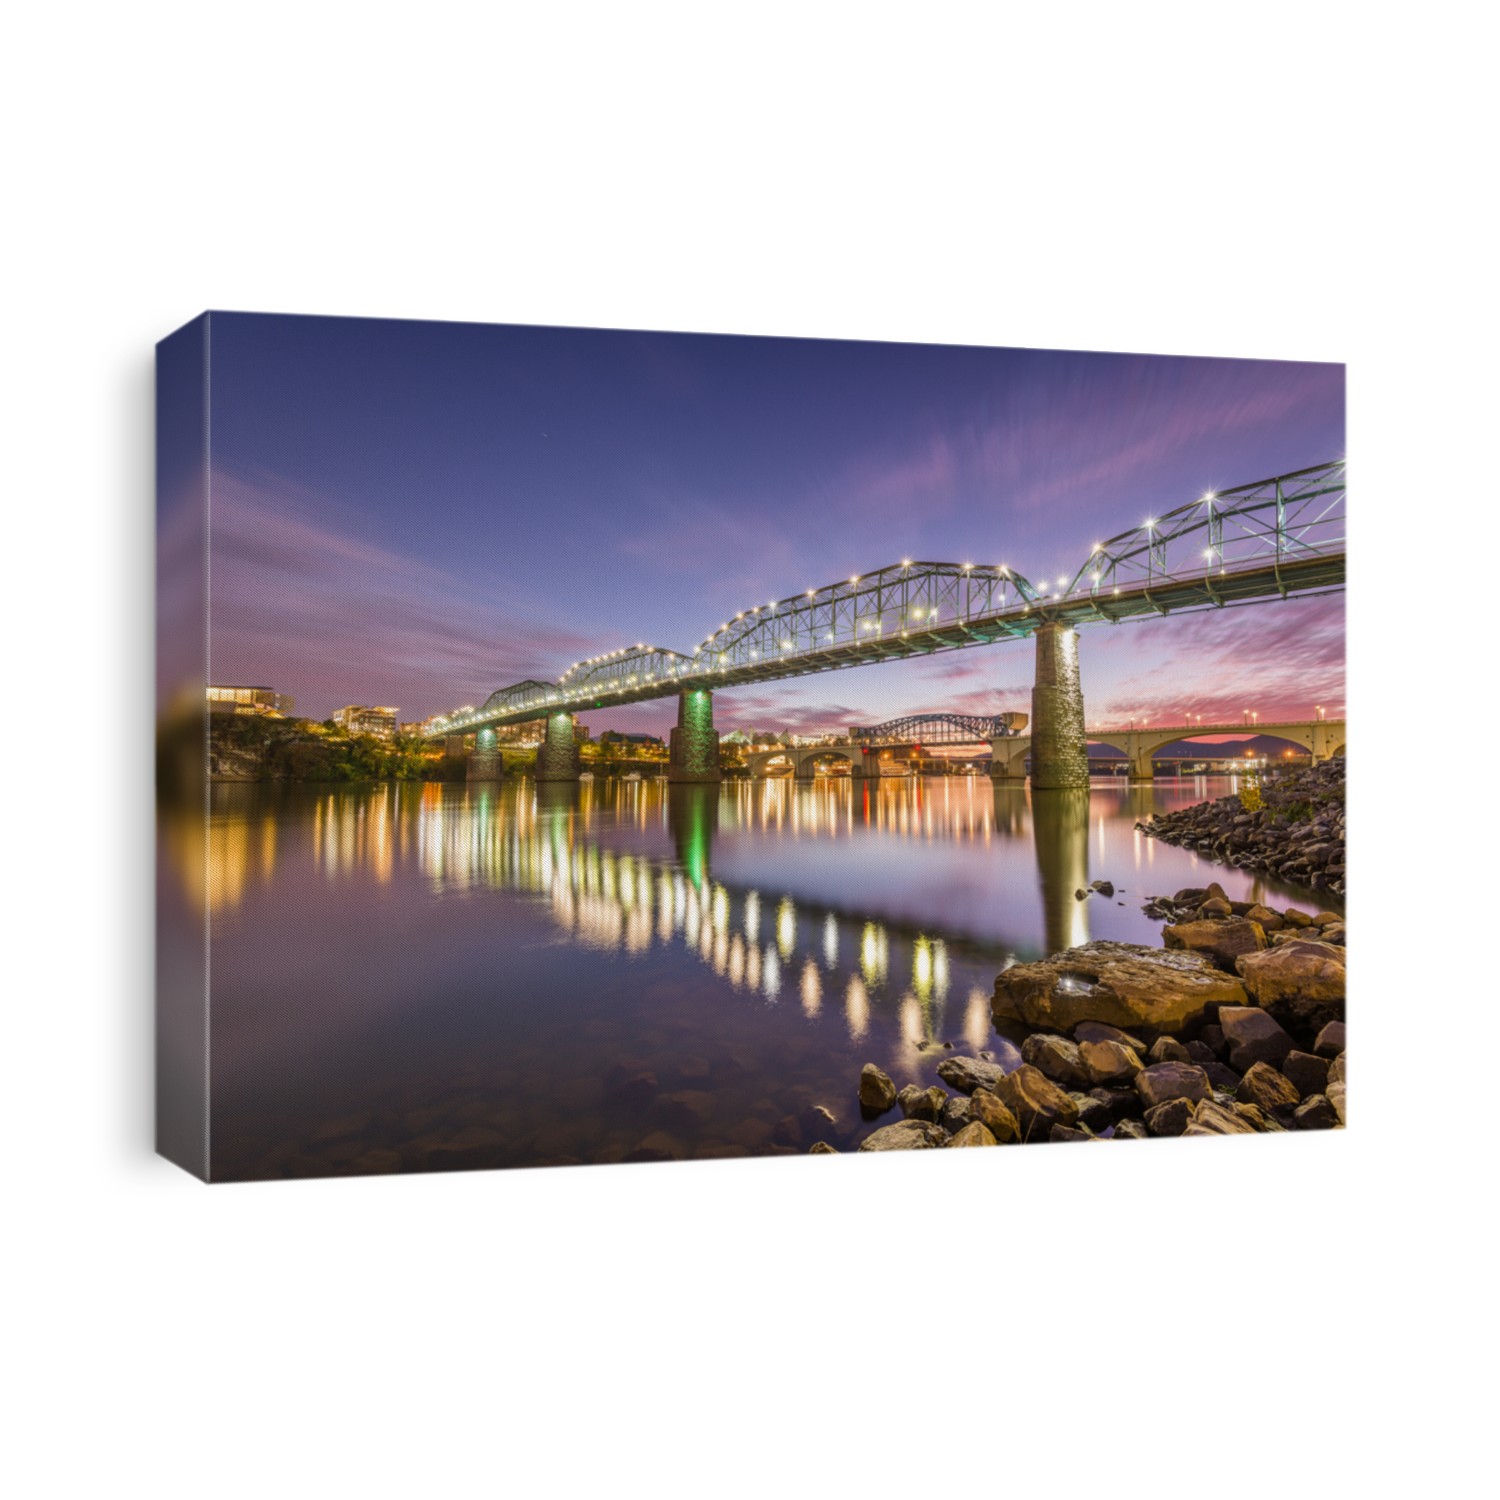 Chattanooga, Tennessee, USA river and bridge at dusk.